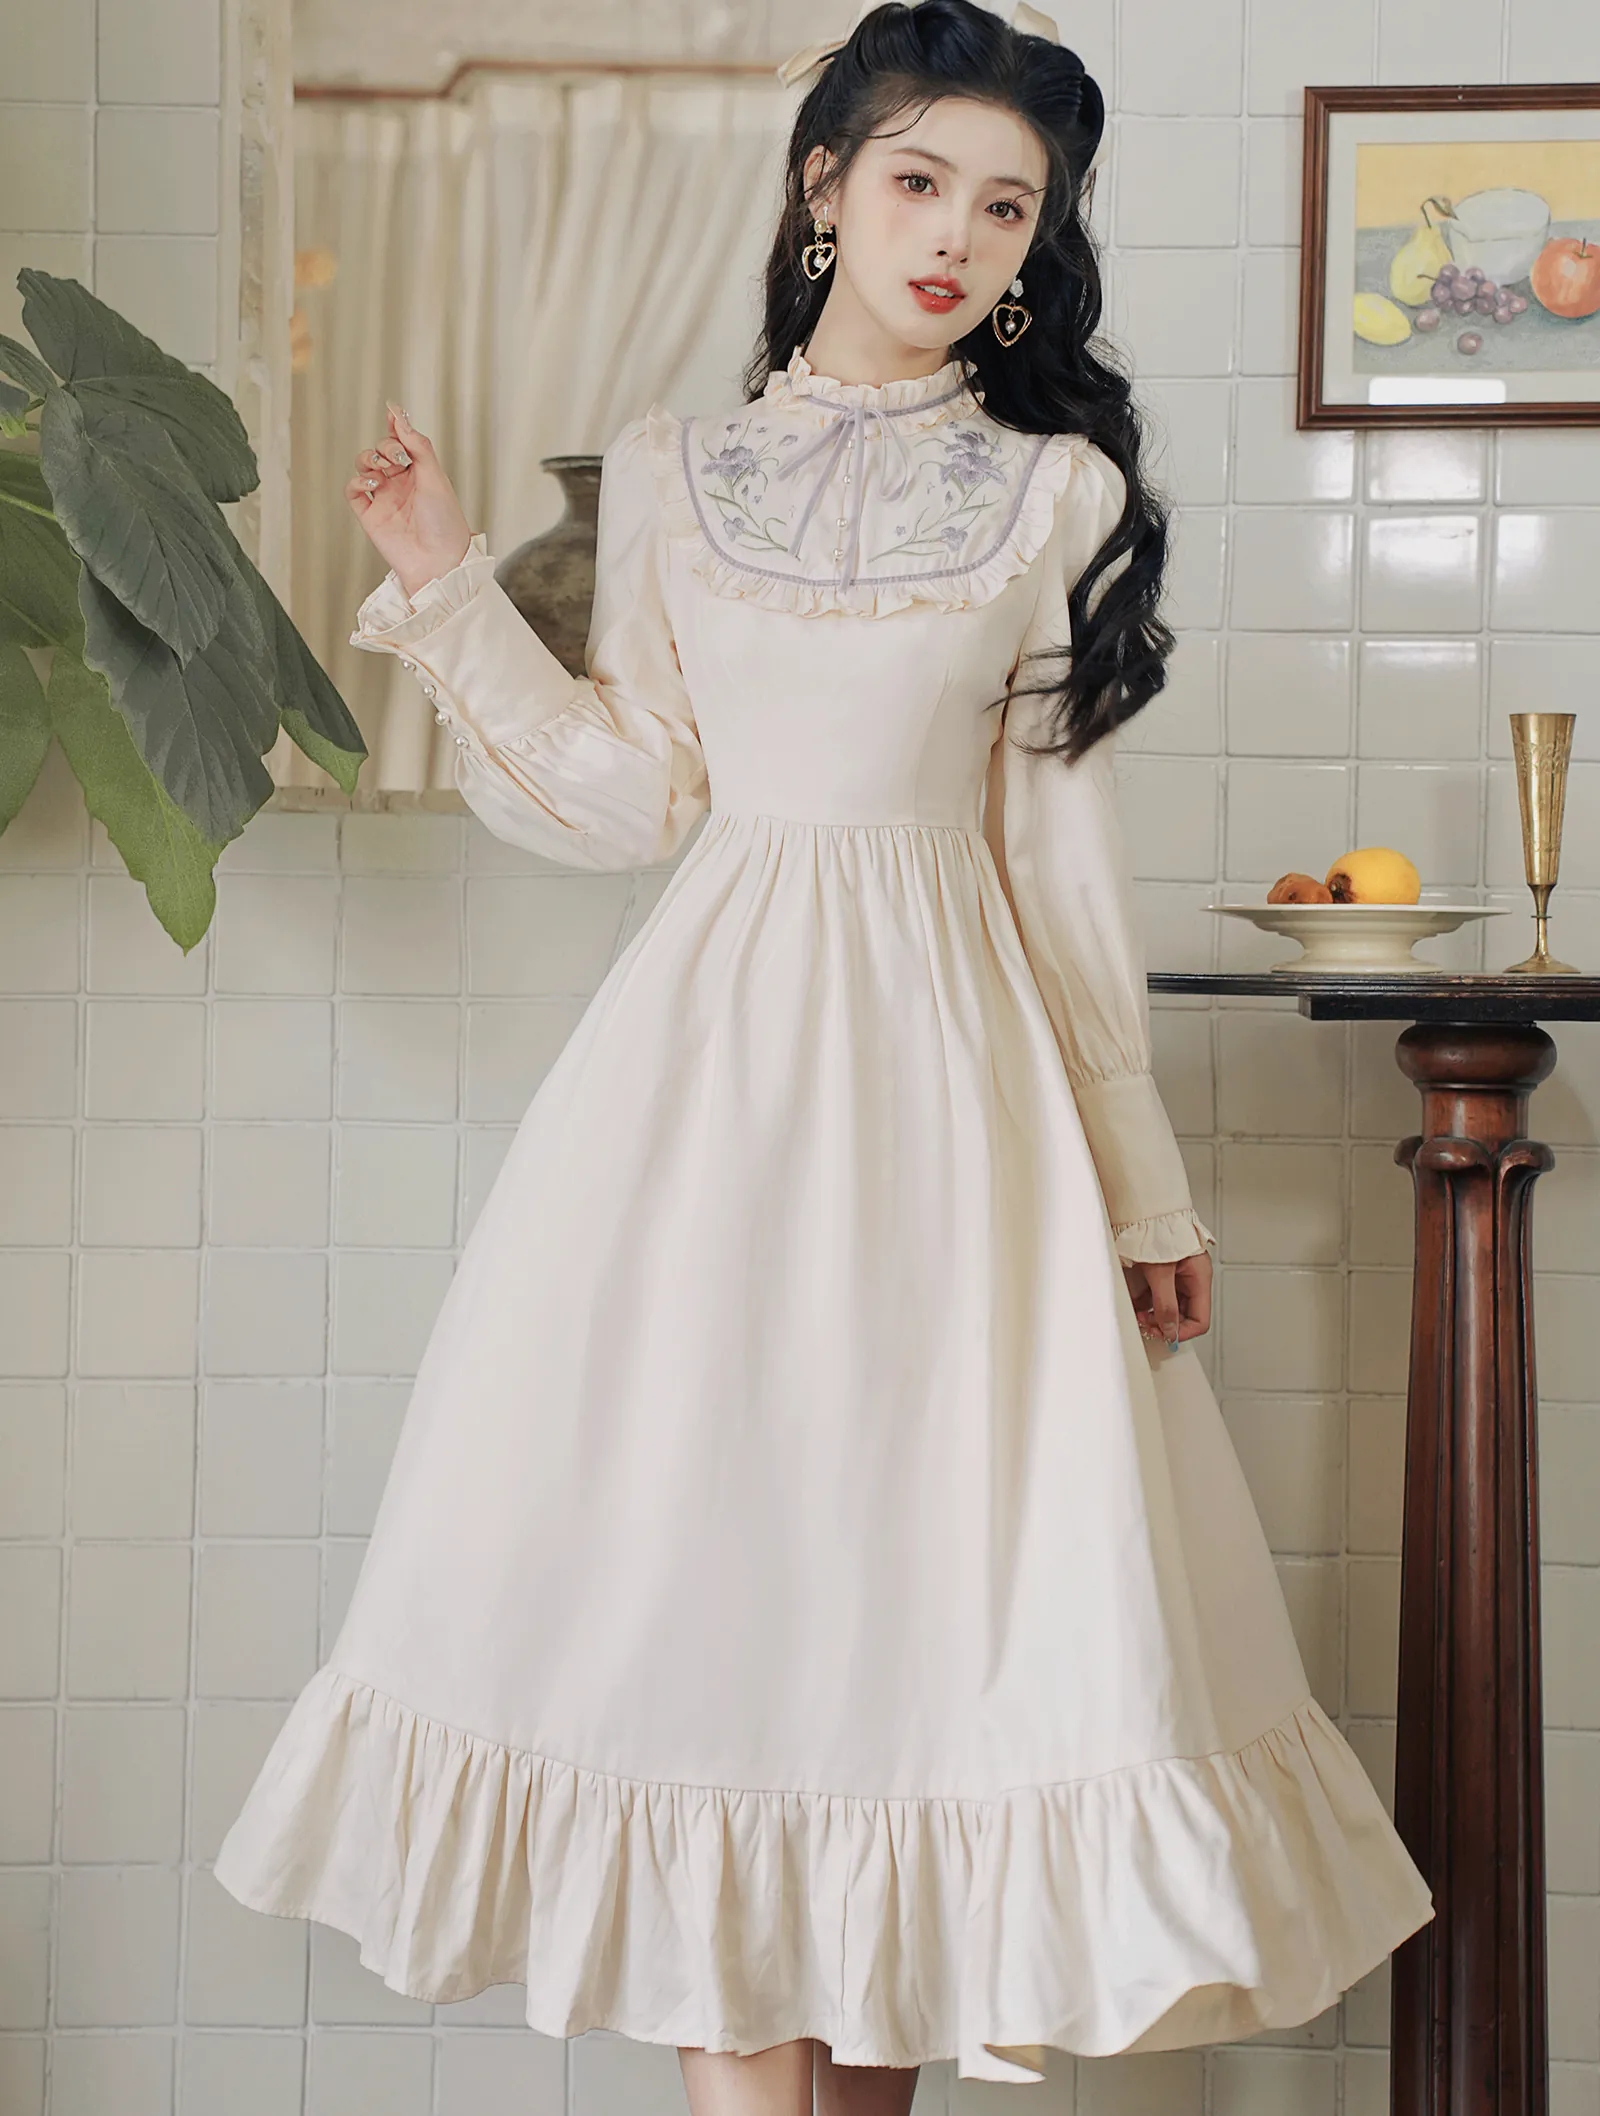 Vintage Sweet Princess Style Ruffle Trim Embroidery Casual Dress01